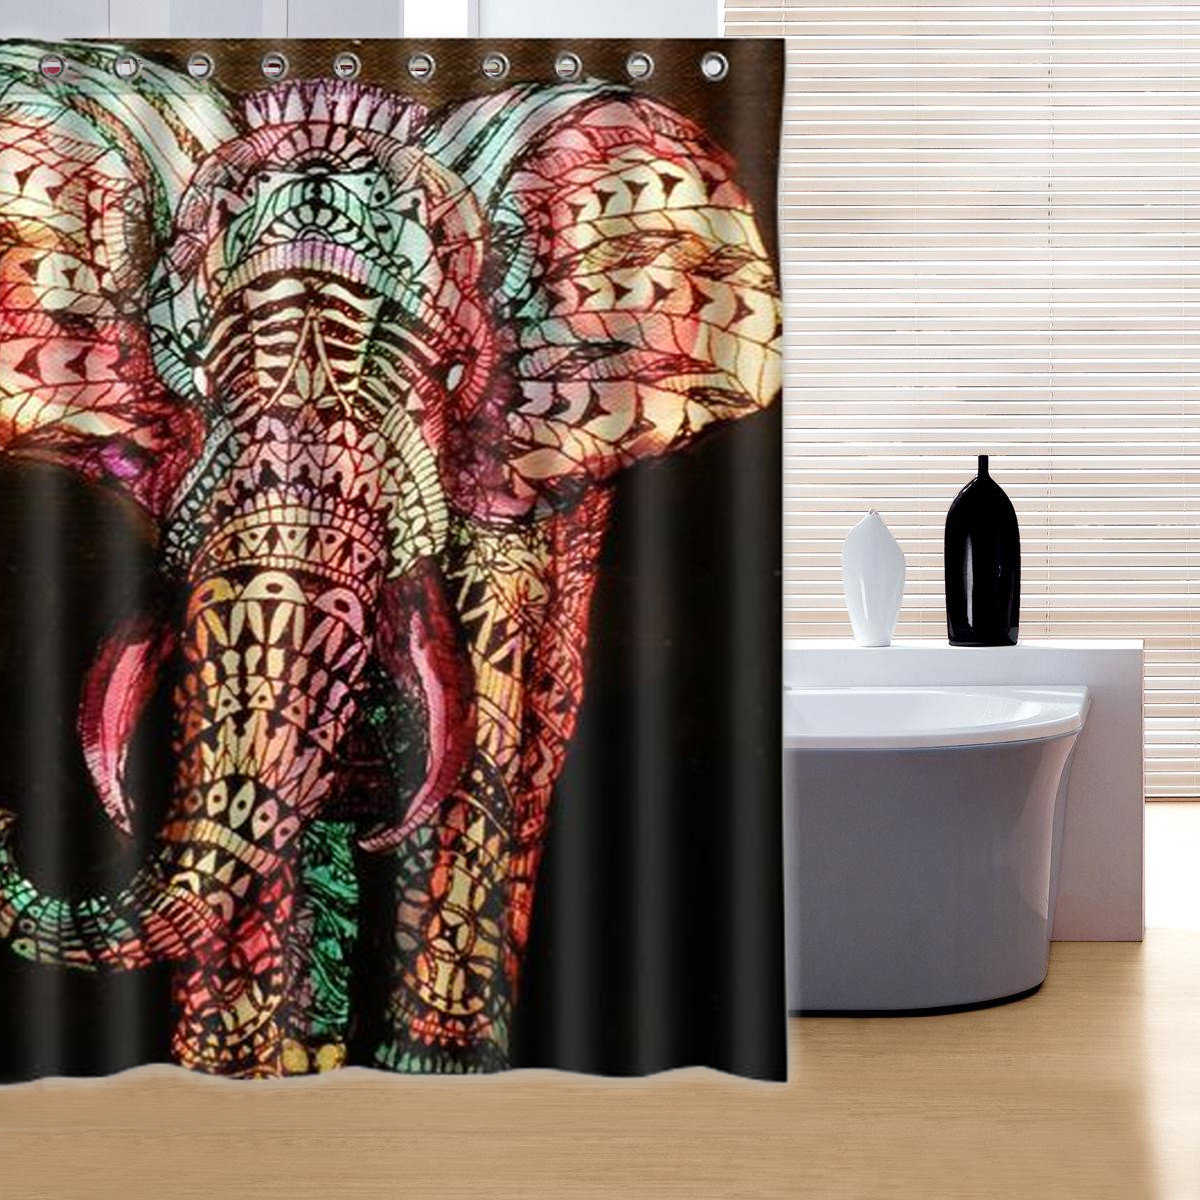 

180*180cm Colorful Elephant Pattern Fabric Waterproof Bathroom Shower Curtain With Hooks